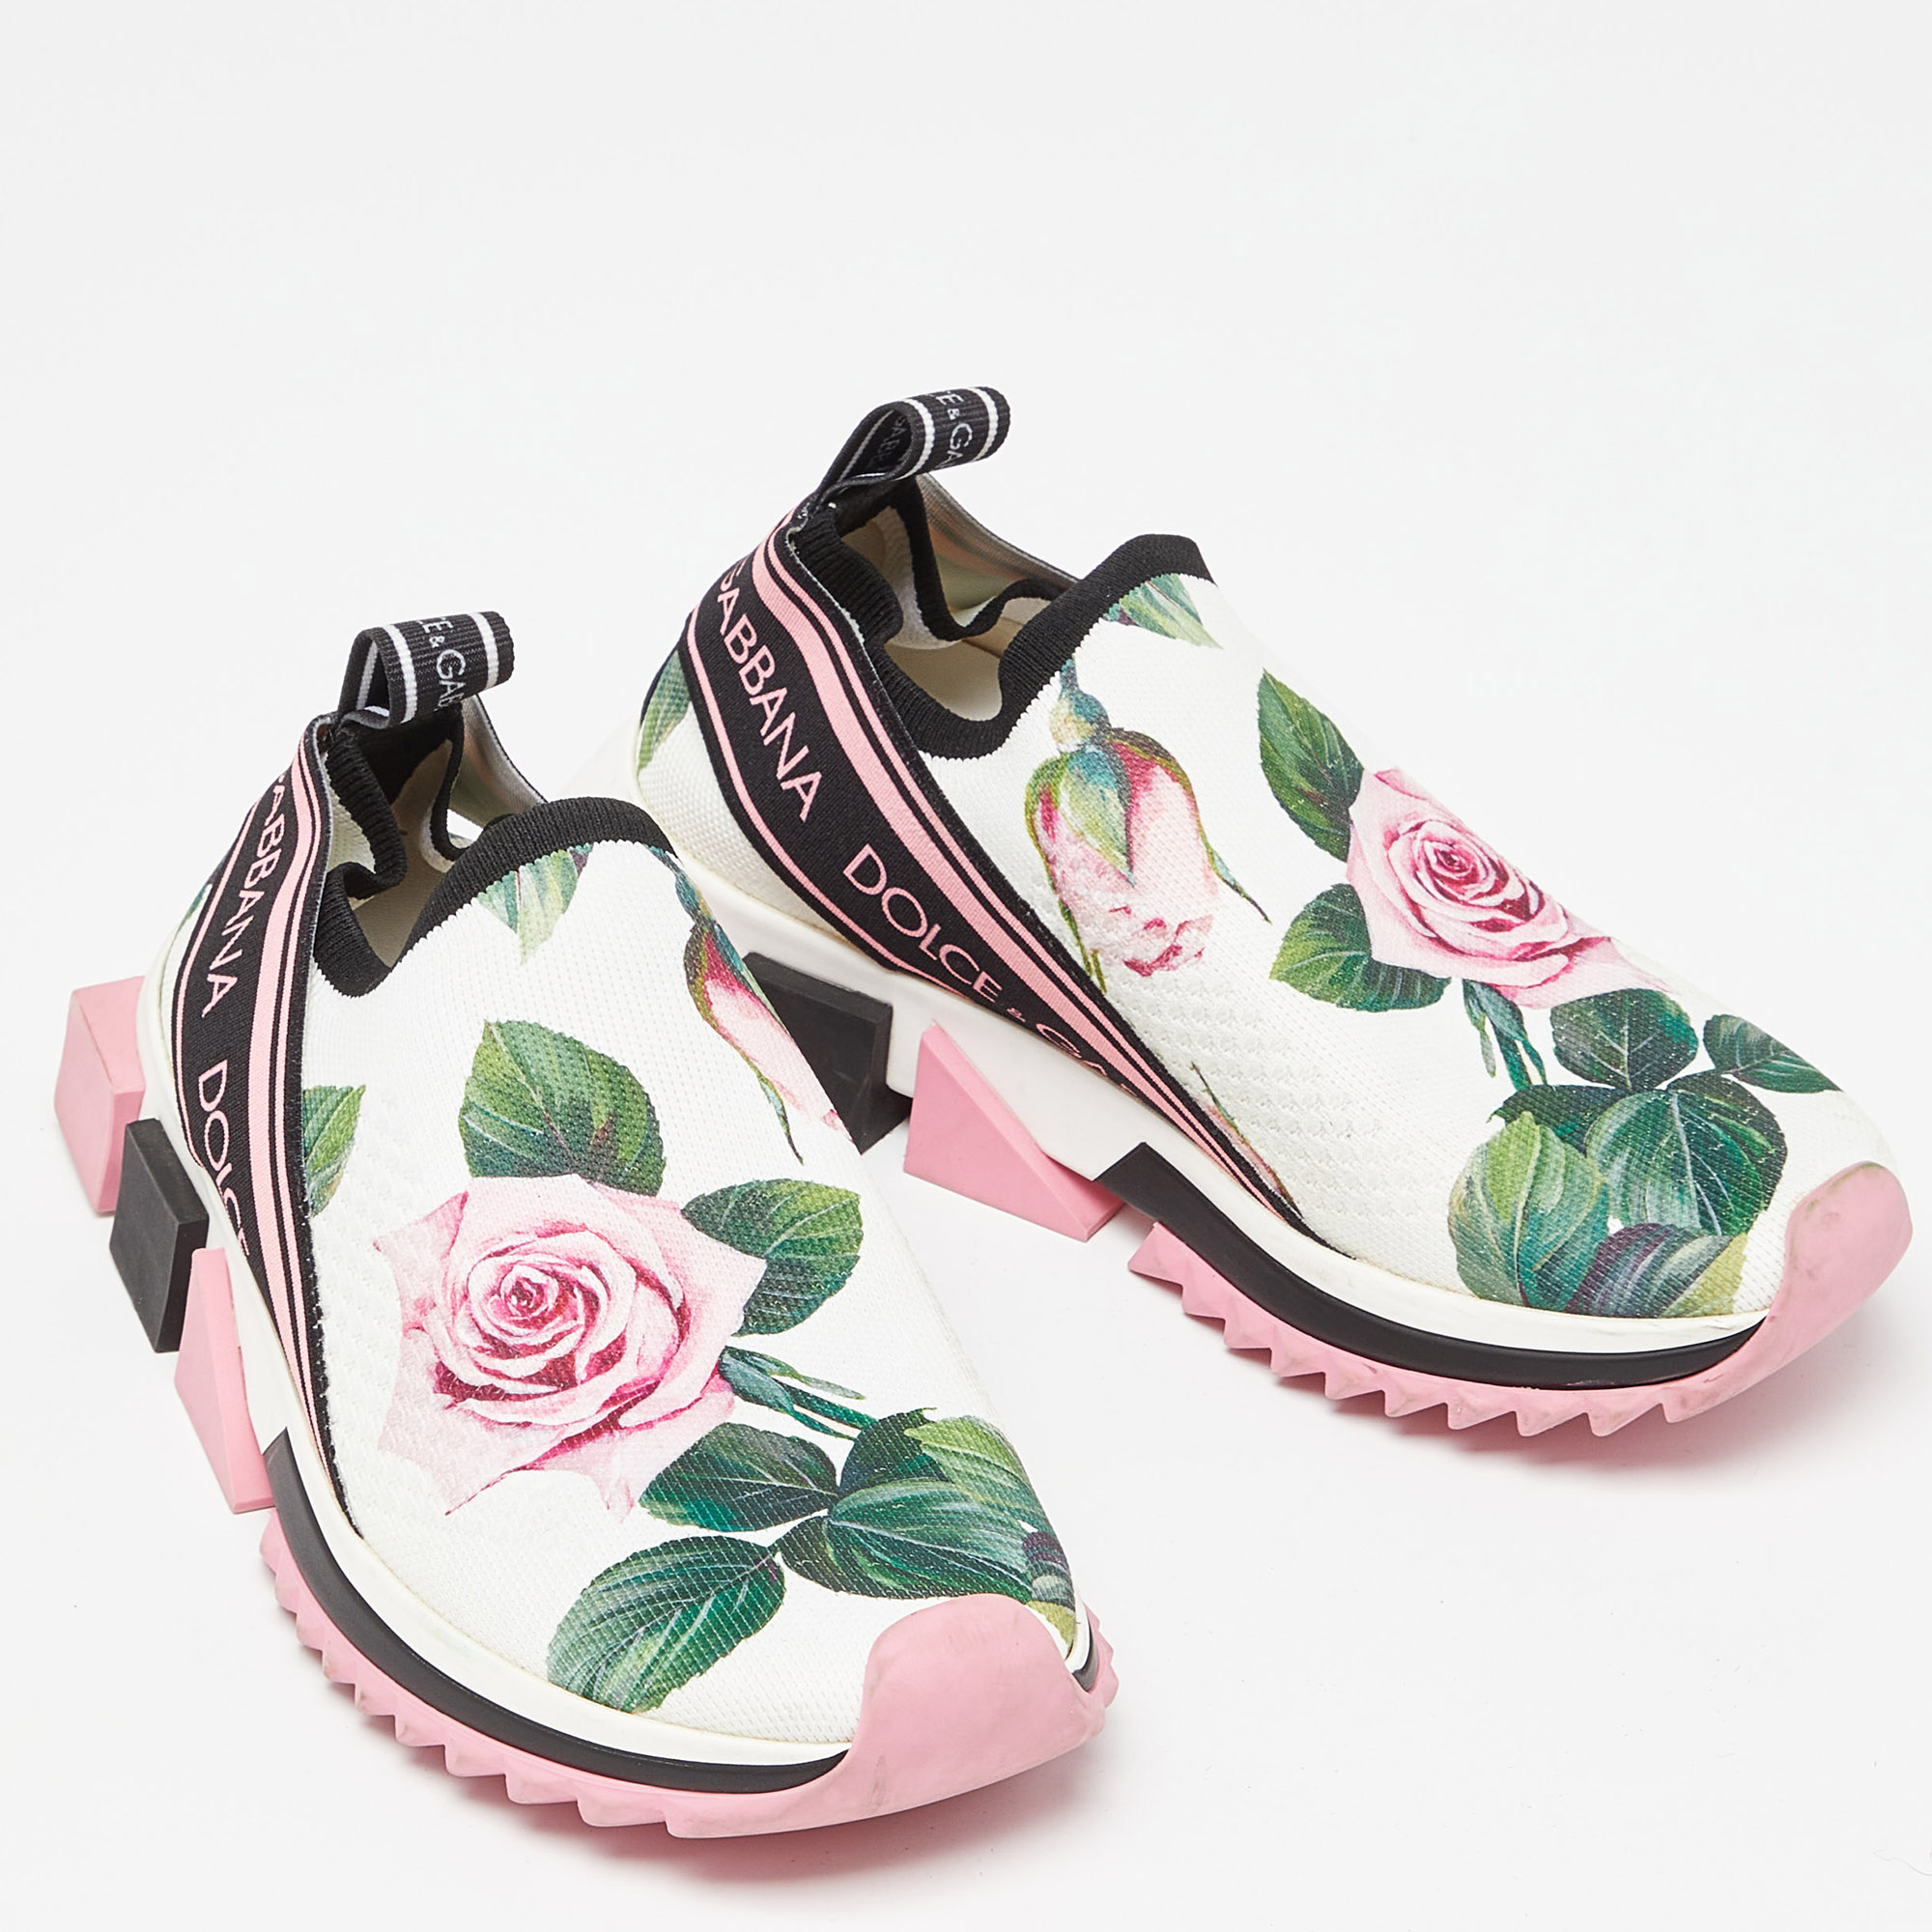 Dolce & Gabbana Tricolor Floral Print Canvas Sorrento Sneakers Size 37